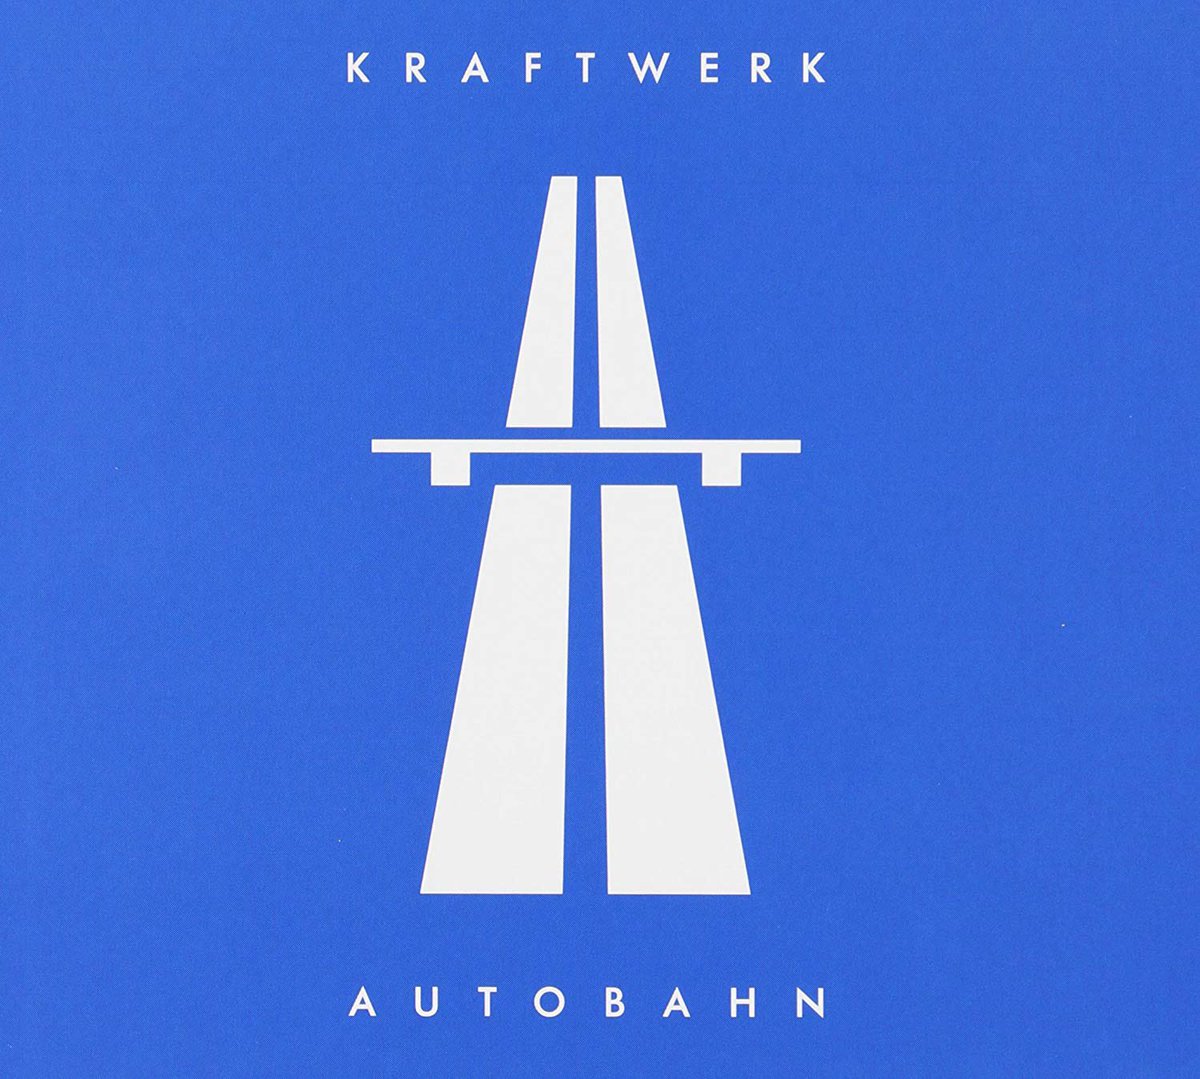 #AlbumQuestMay 

30 - album that got better over time

I did really get Kraftwerk when I was younger but have appreciated them more recently. Could be any of their albums for this prompt, but will go with Autobahn